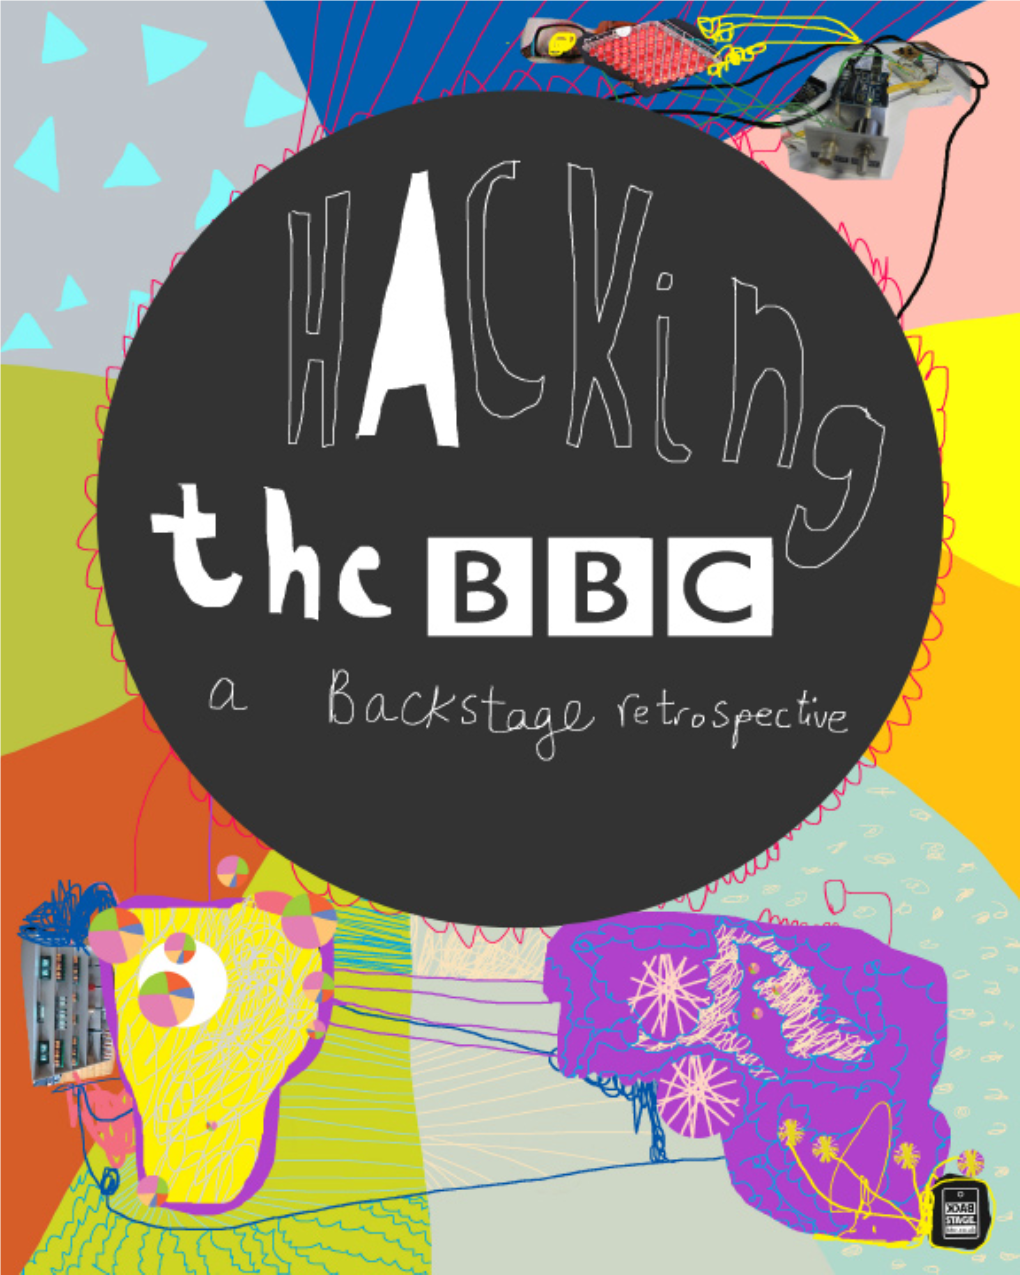 BBC Backstage's Project